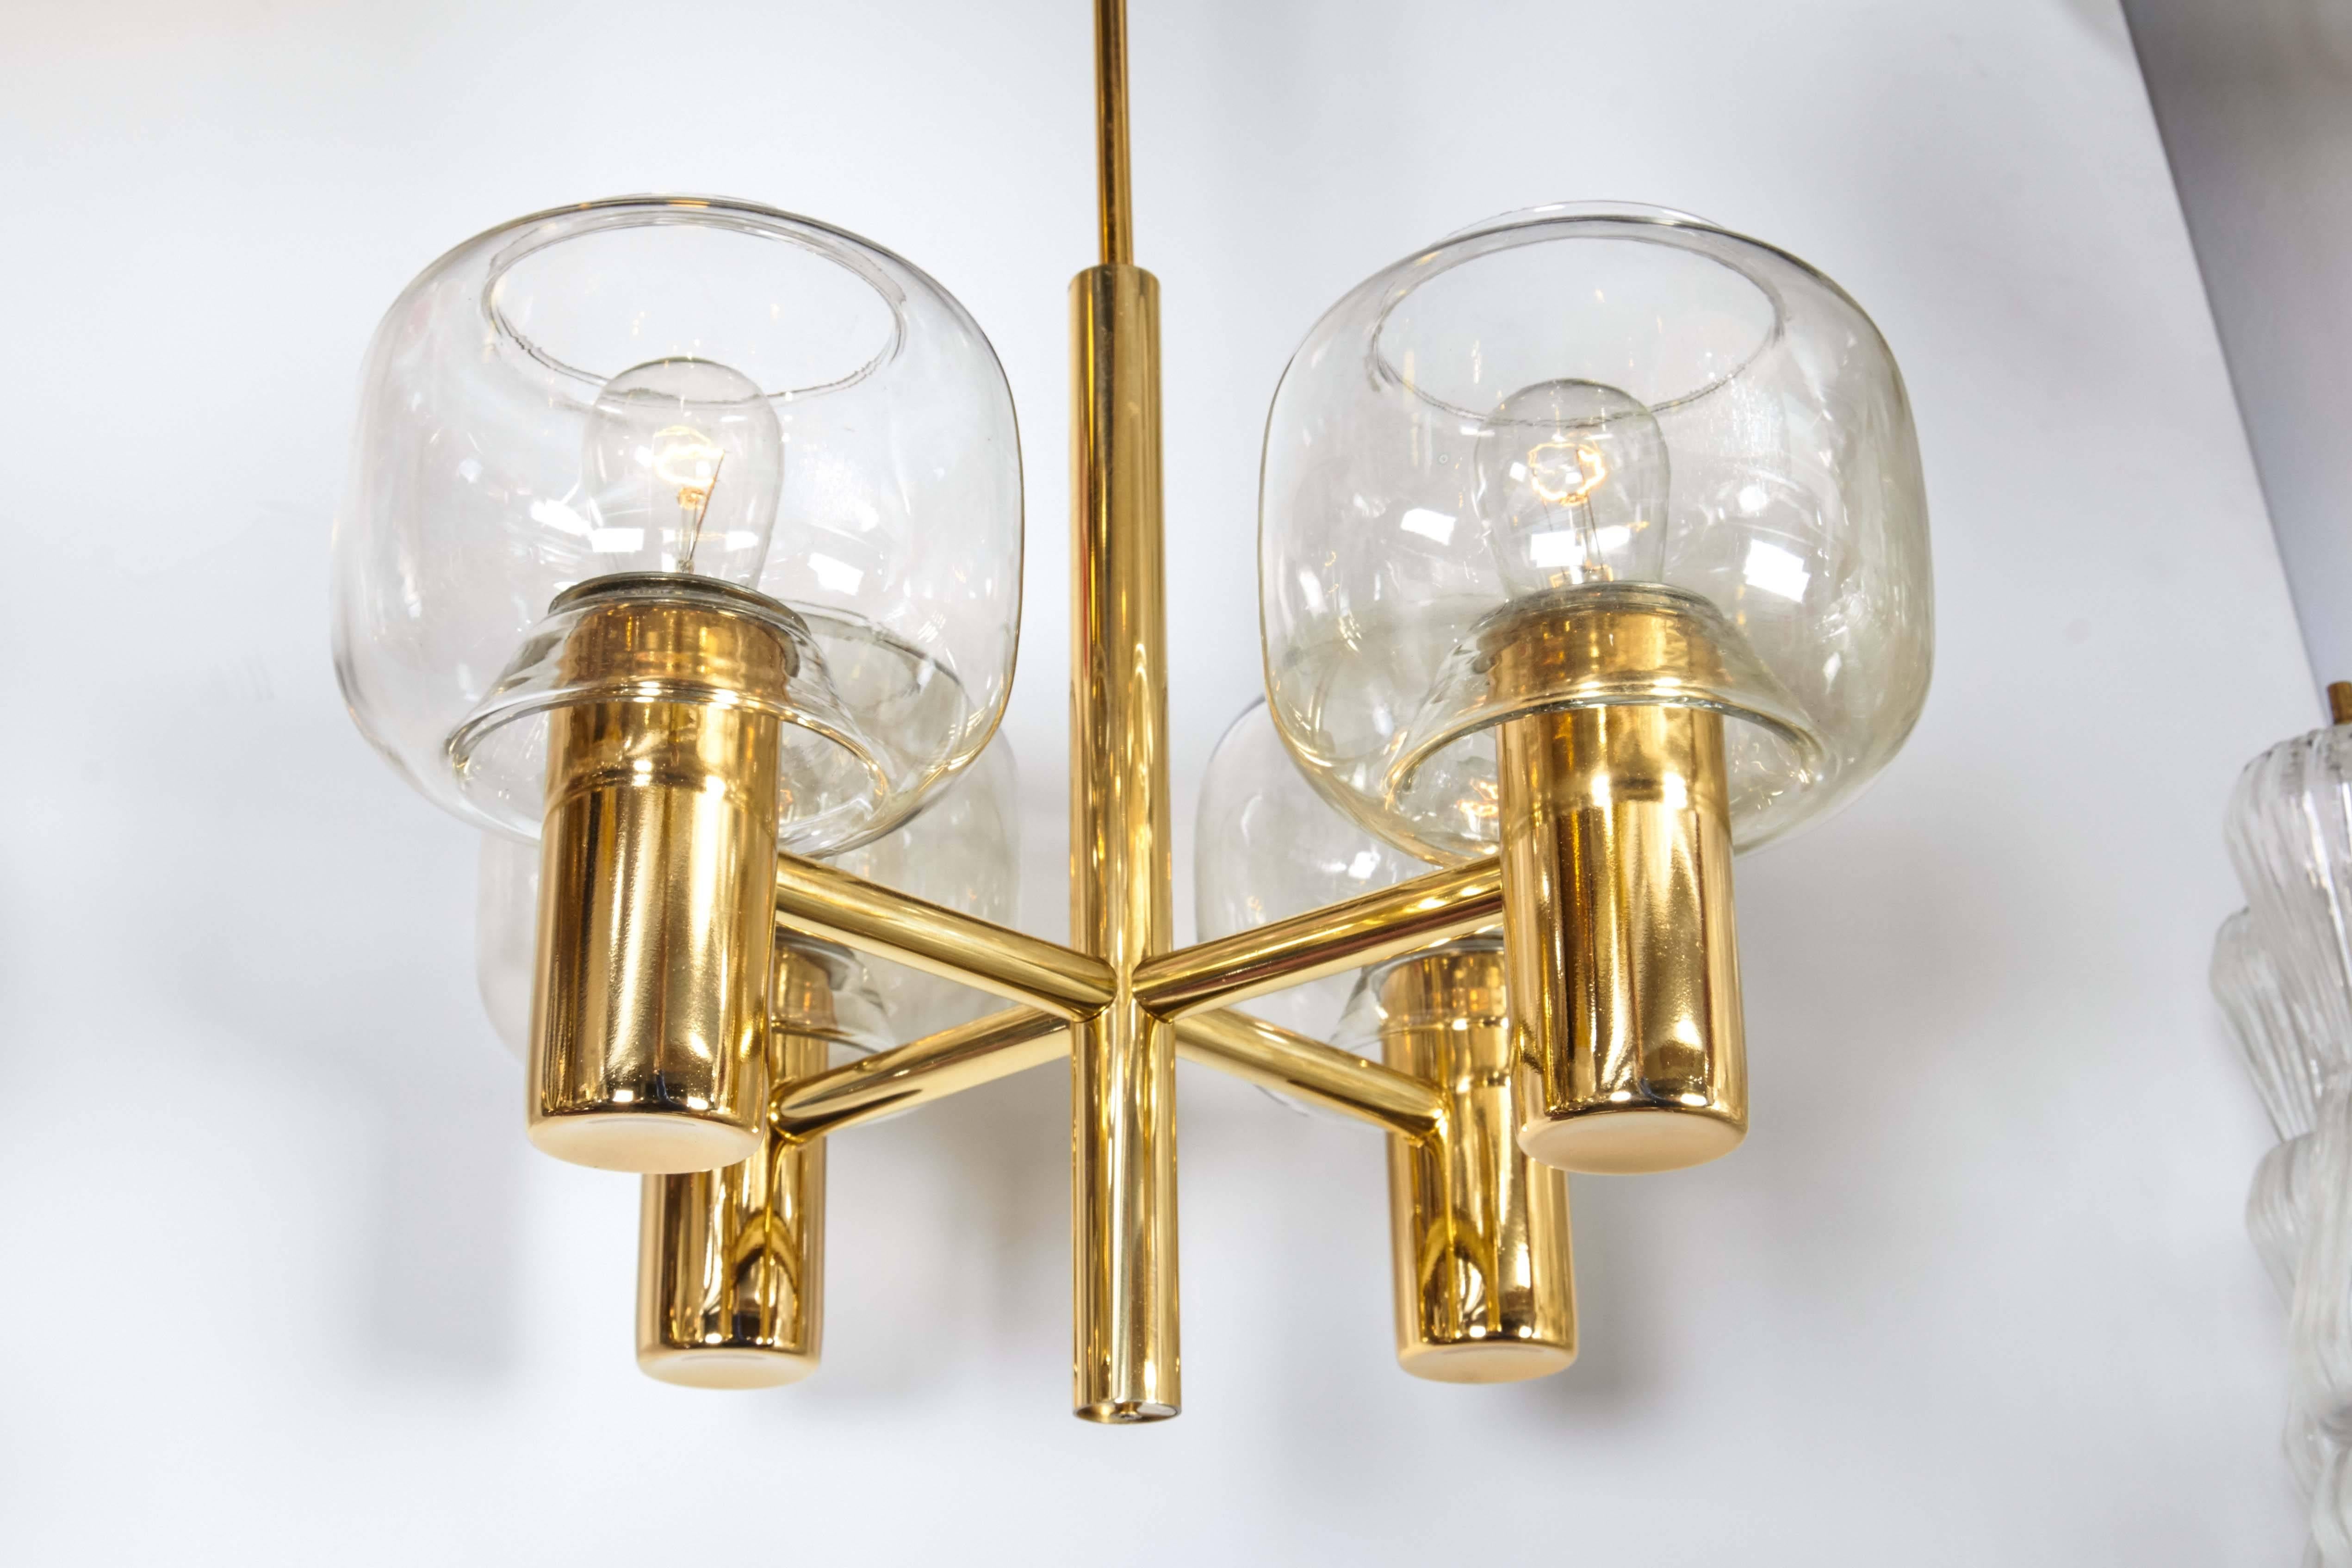 Hans-Agne Jakobsson brass with pale smoke amber blown glass shade four-arm chandelier.
Brass polished and lacquered, rewired.
Dimensions: 17